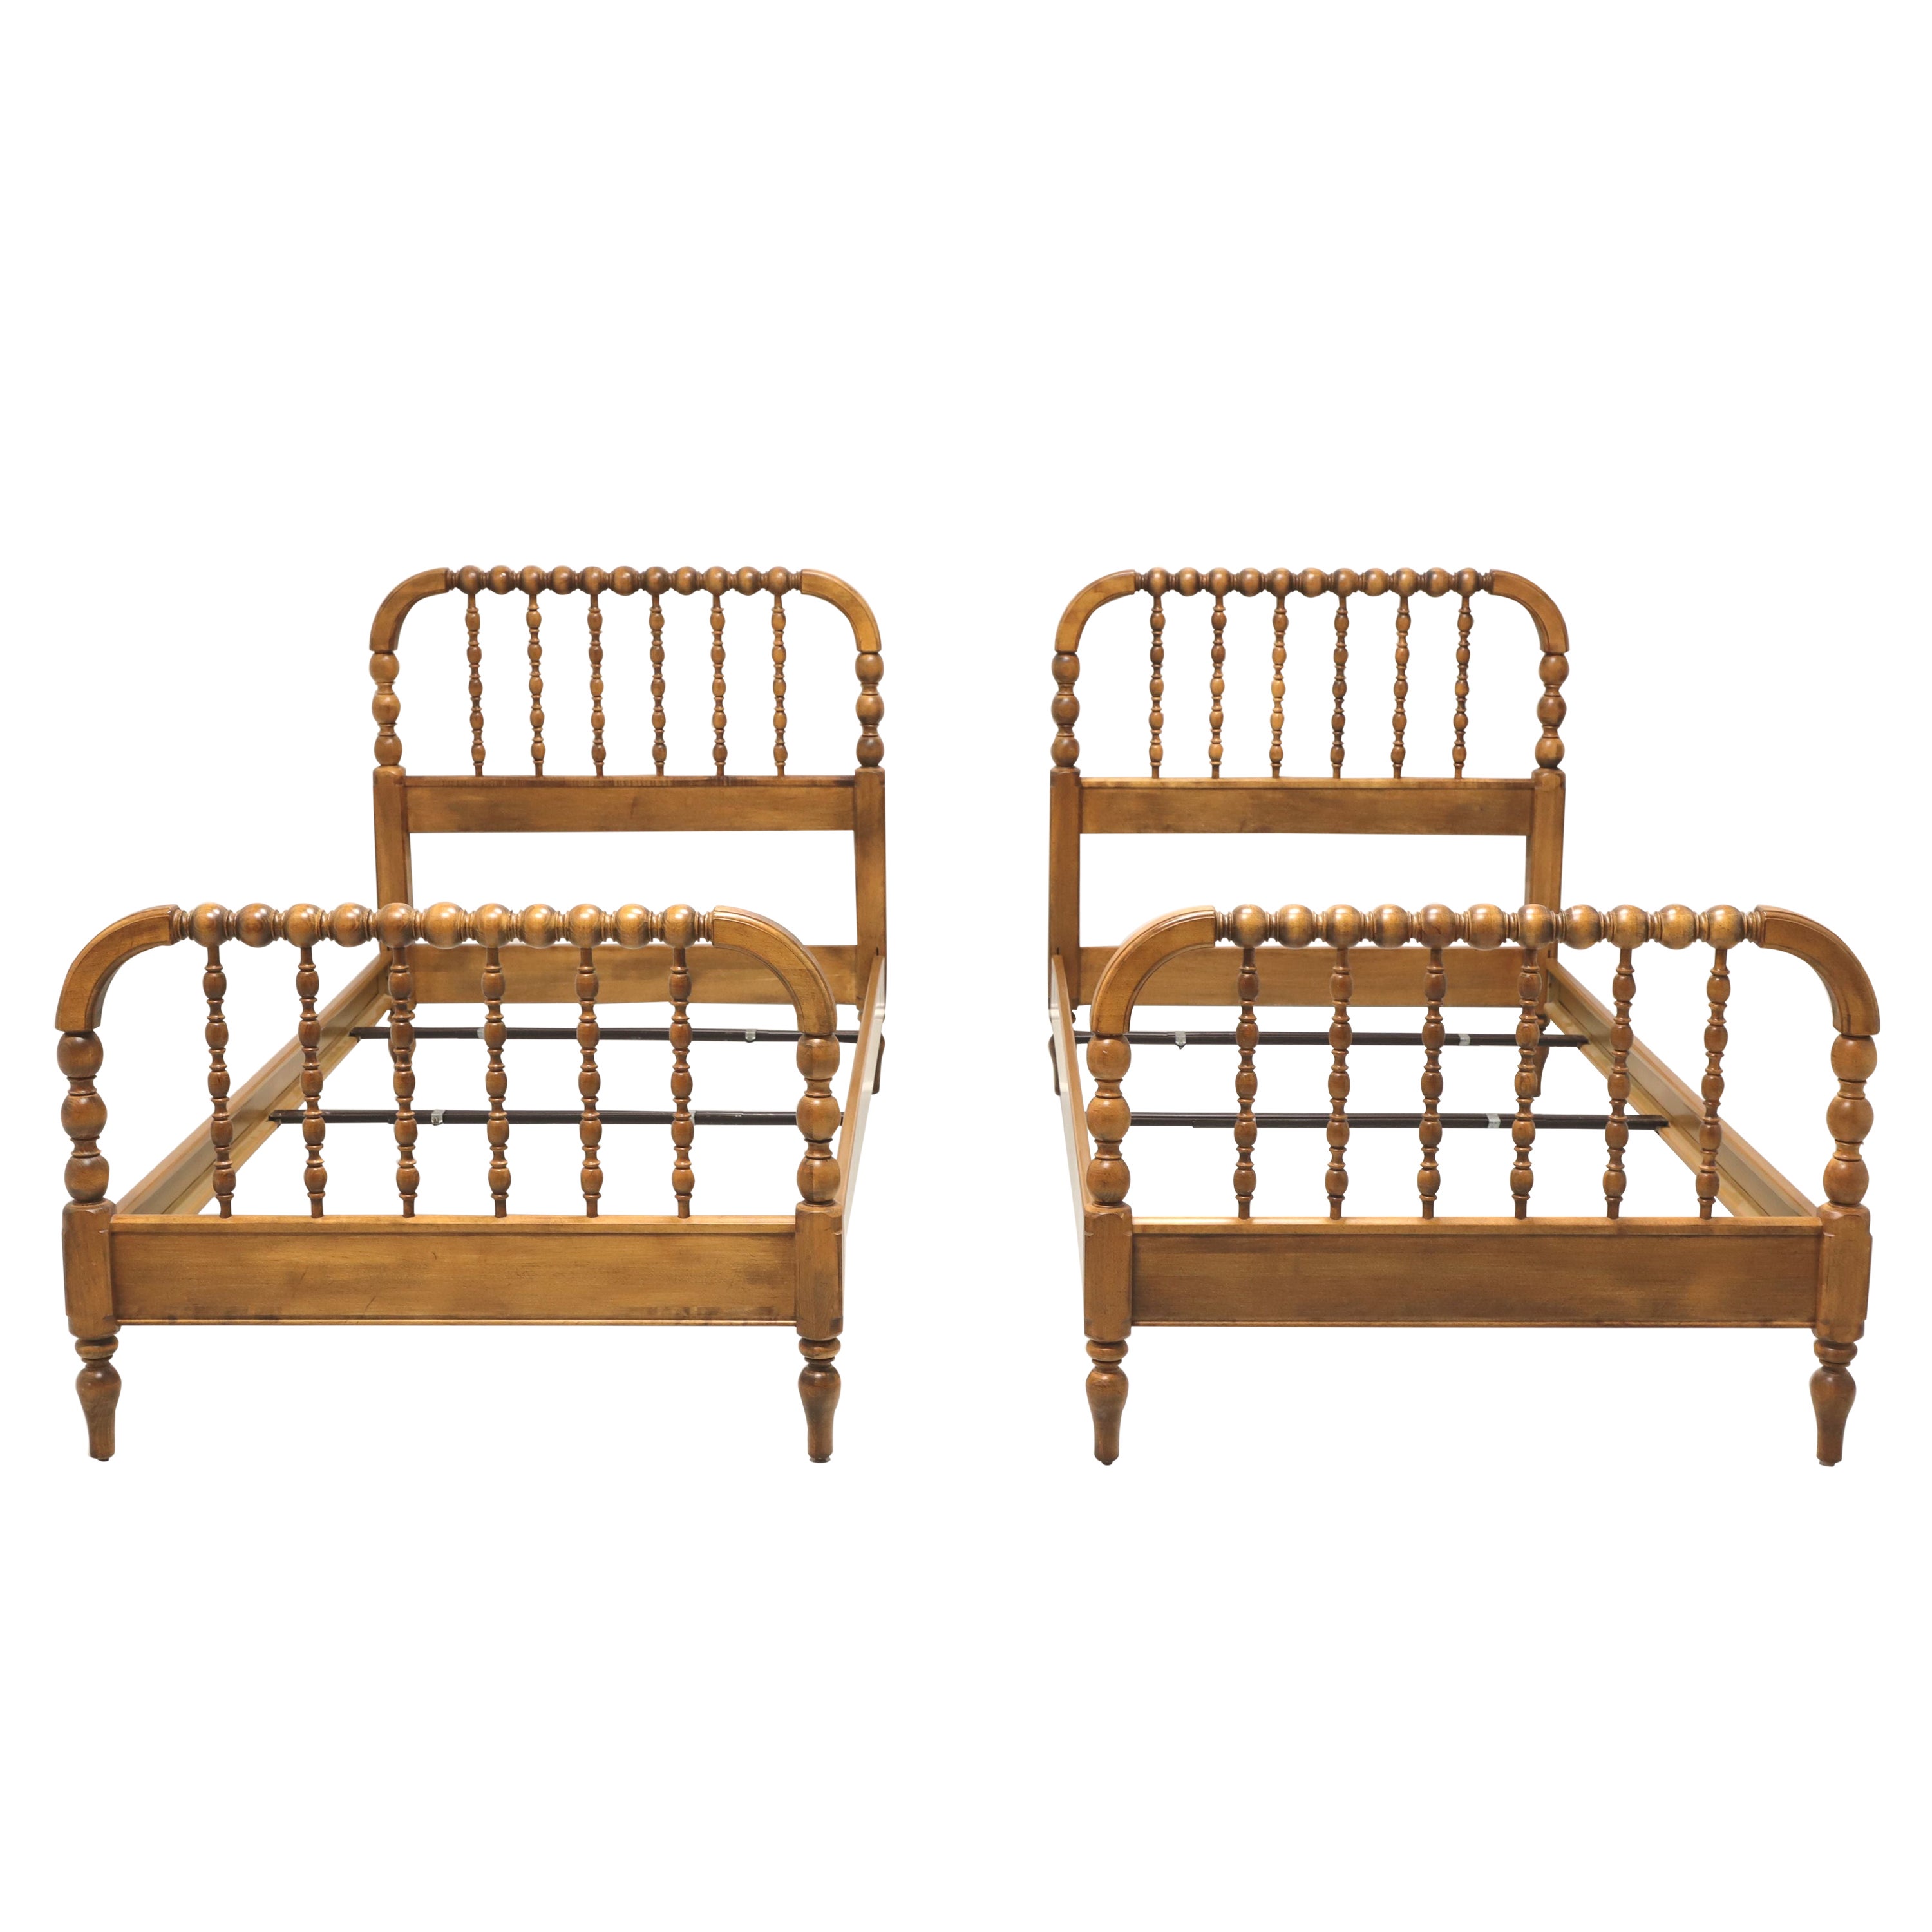 ETHAN ALLEN Maple Jenny Lind Twin Size Beds - Pair